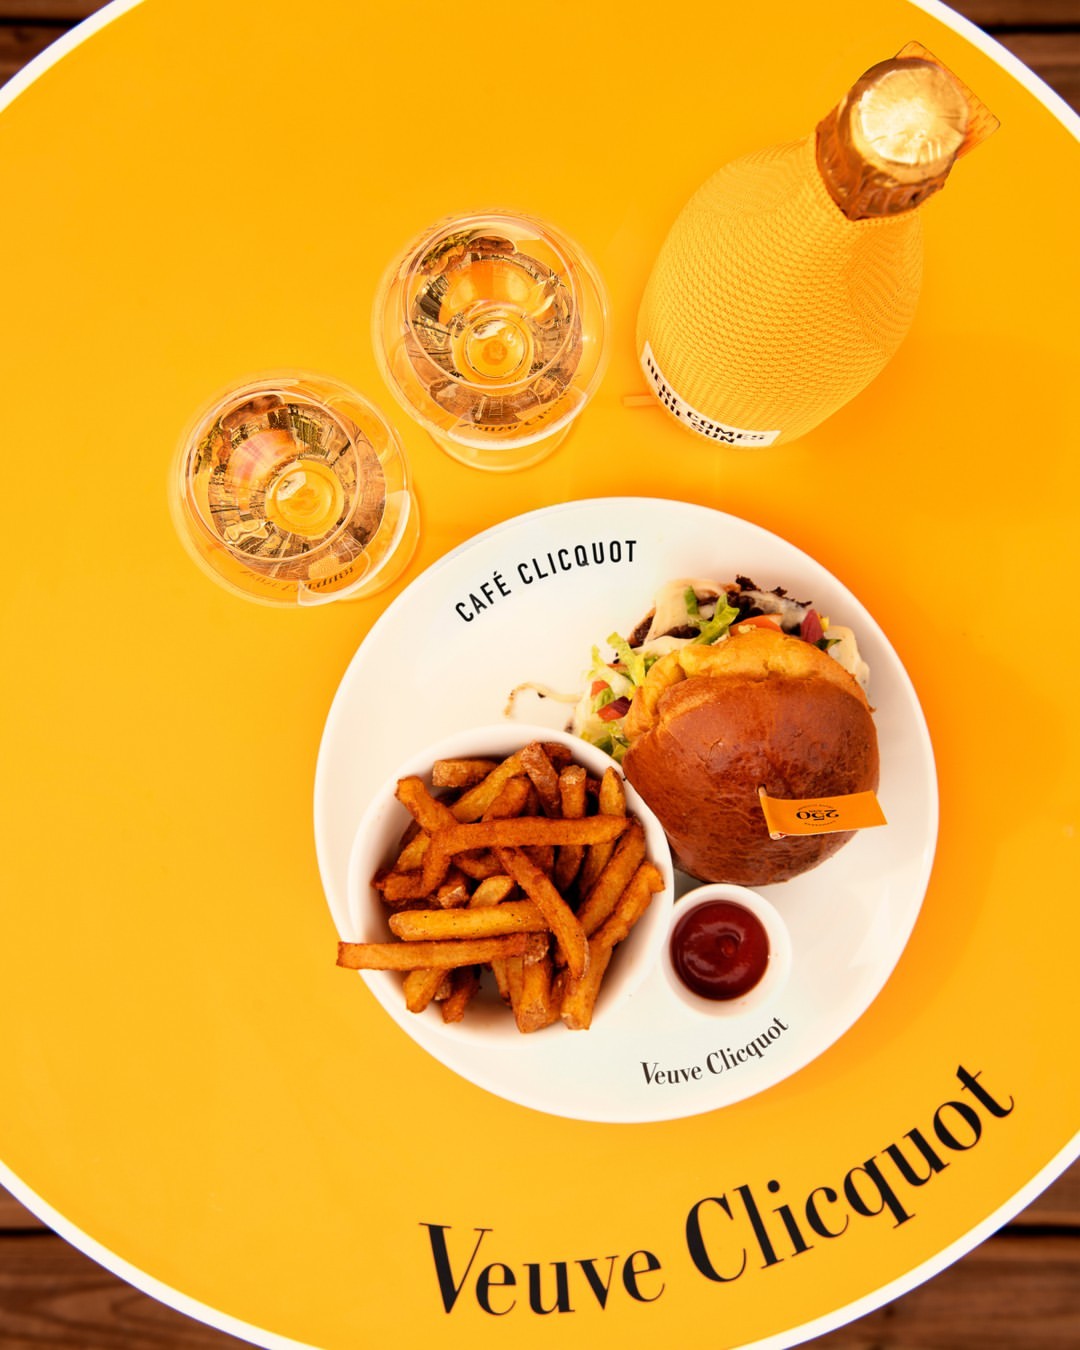 a top down photo of a burger and fries with two glasses of veuve cliquot champagne, and a bottle of champagne. all sitting on a bright yellow-y orange table - veuve branded.